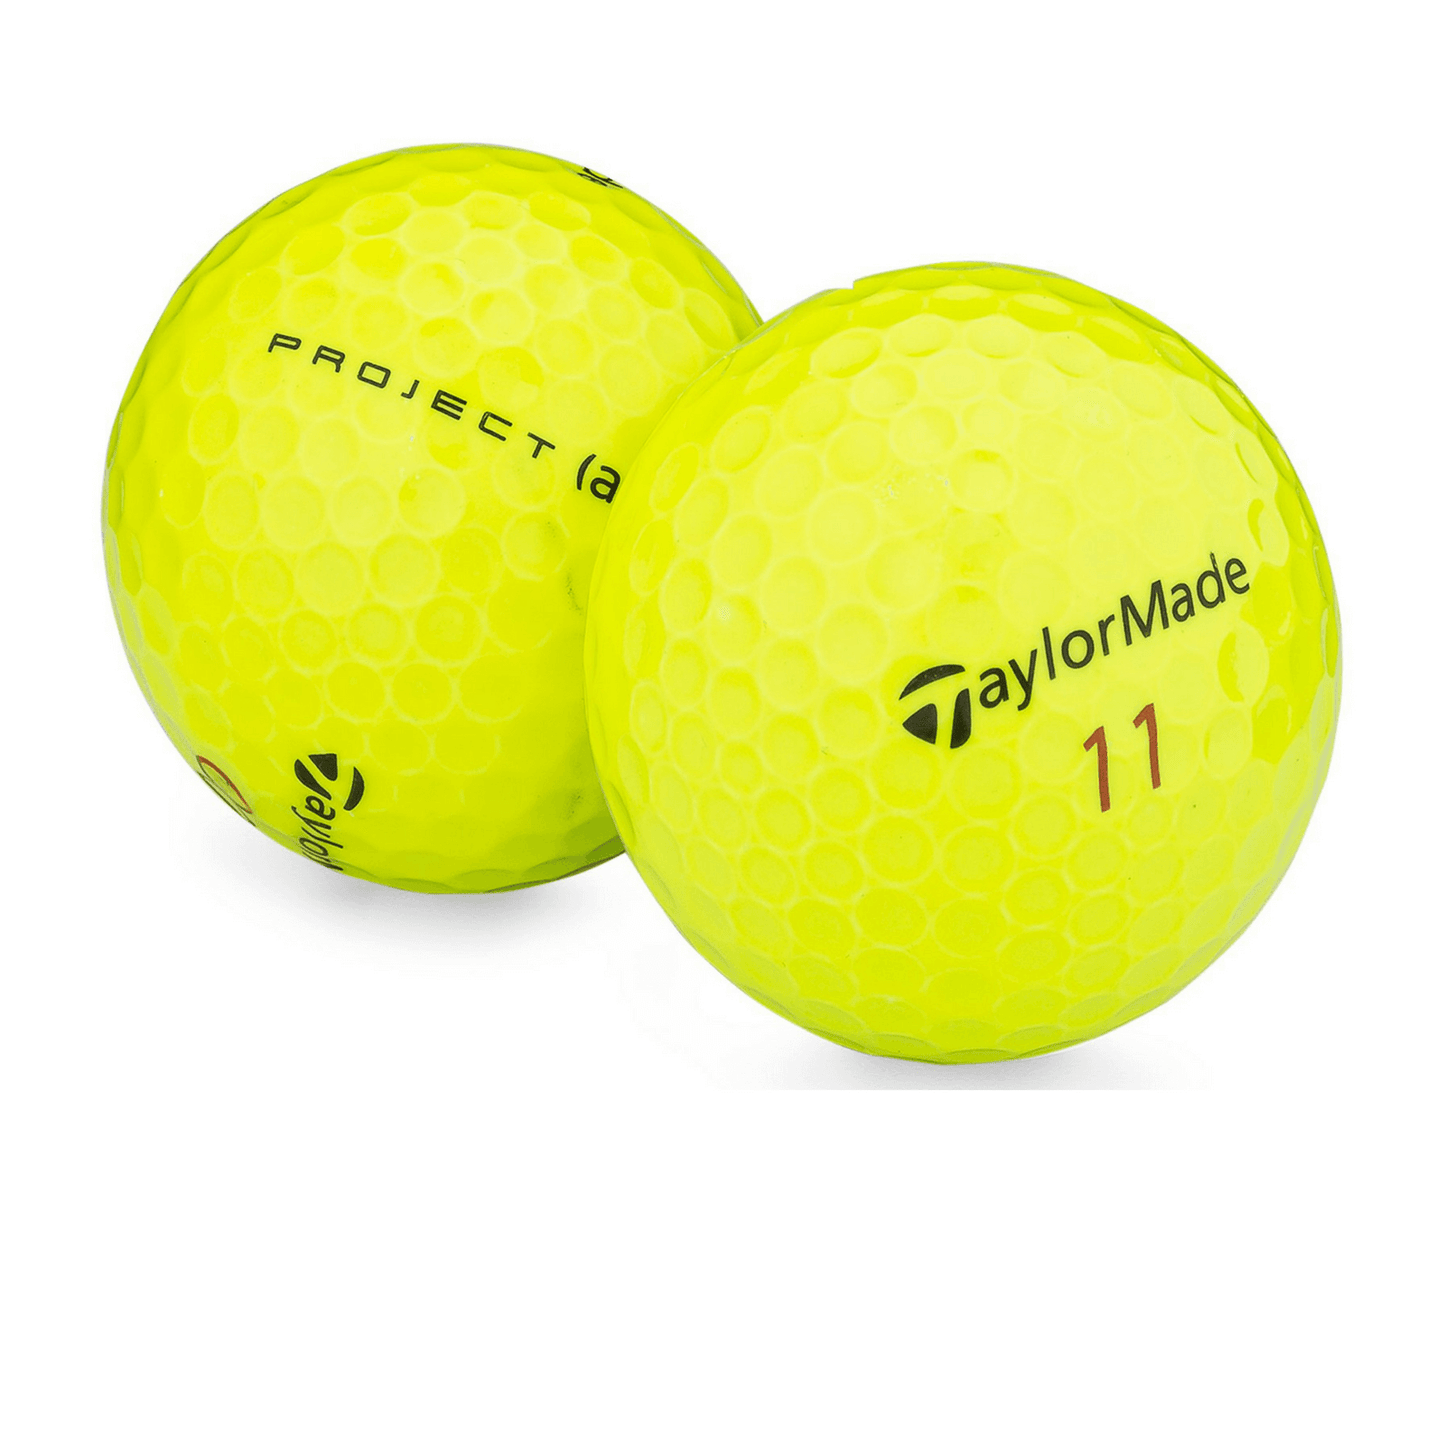 Used TaylorMade Project (a) Yellow Golf Balls - 1 Dozen